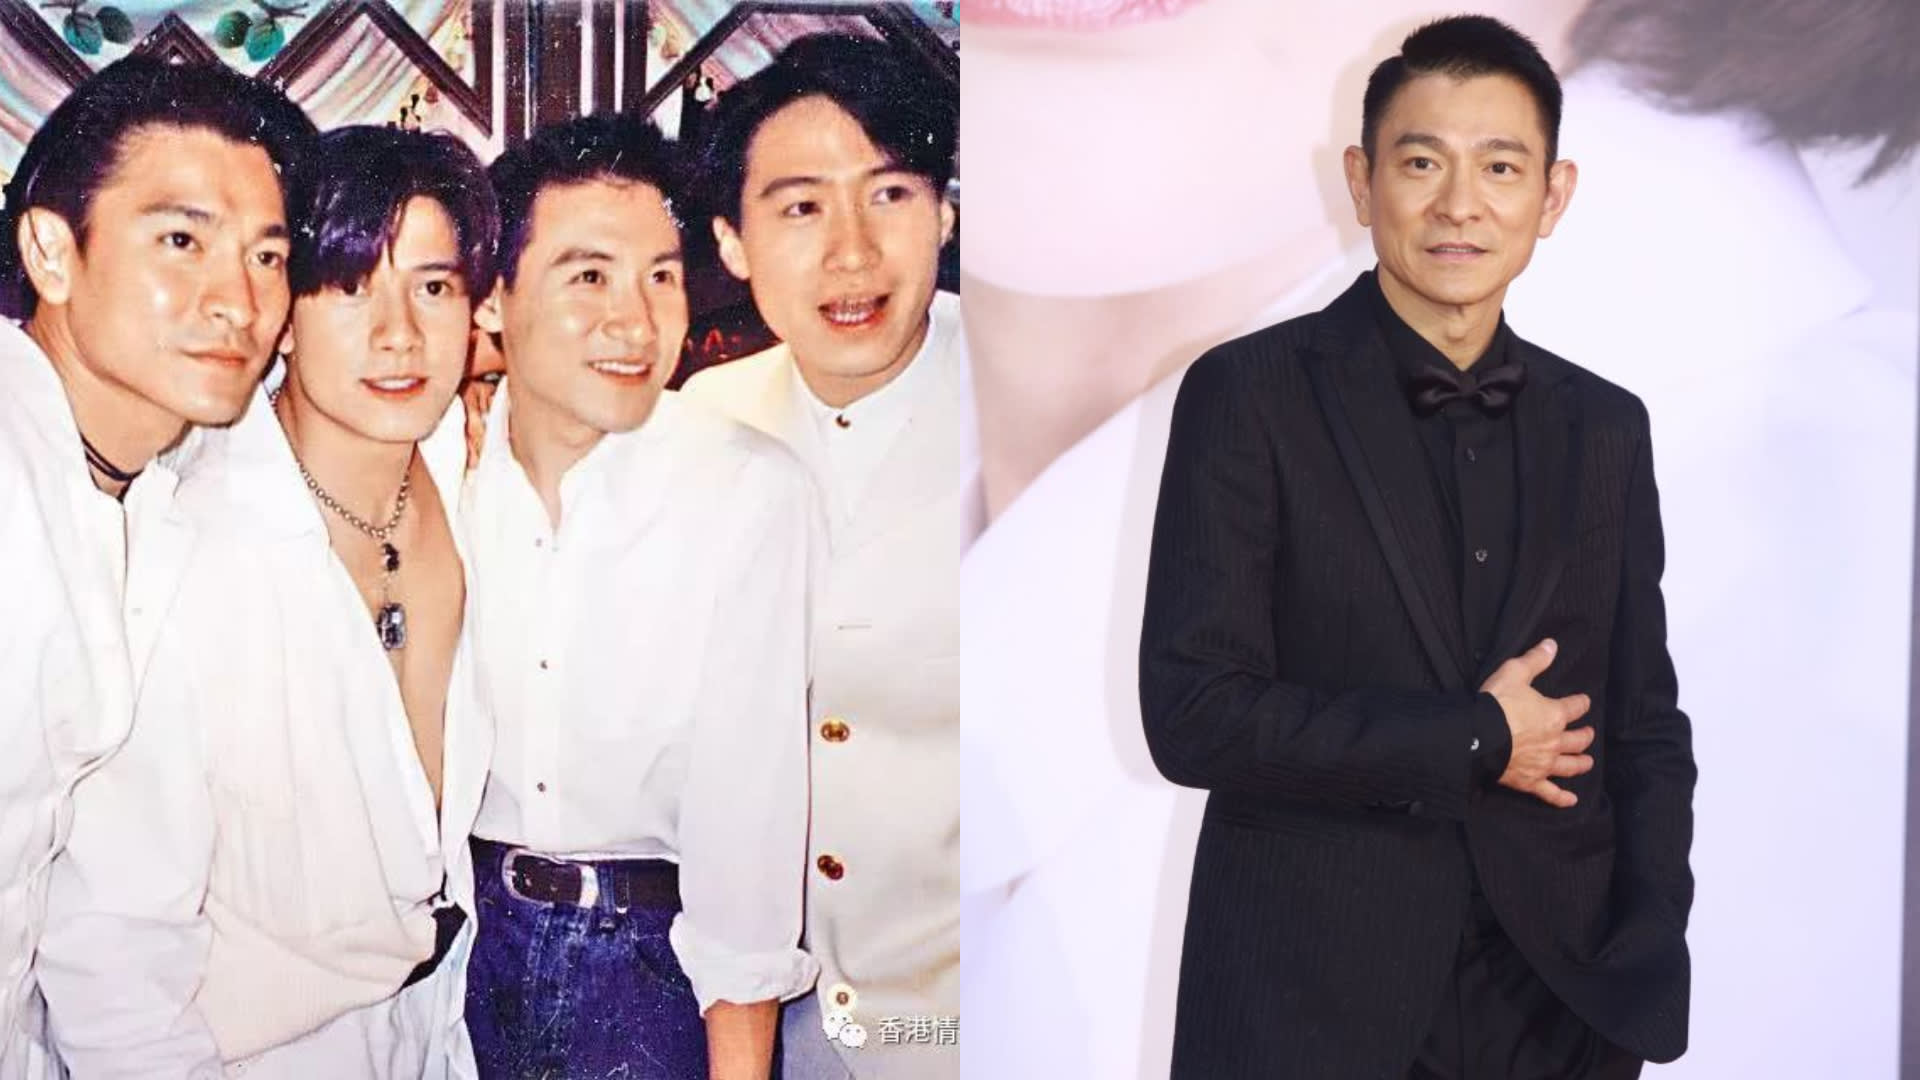 Andy Lau Wants An Epic Reunion For The Four Heavenly Kings - But Who's Holding Them Back?